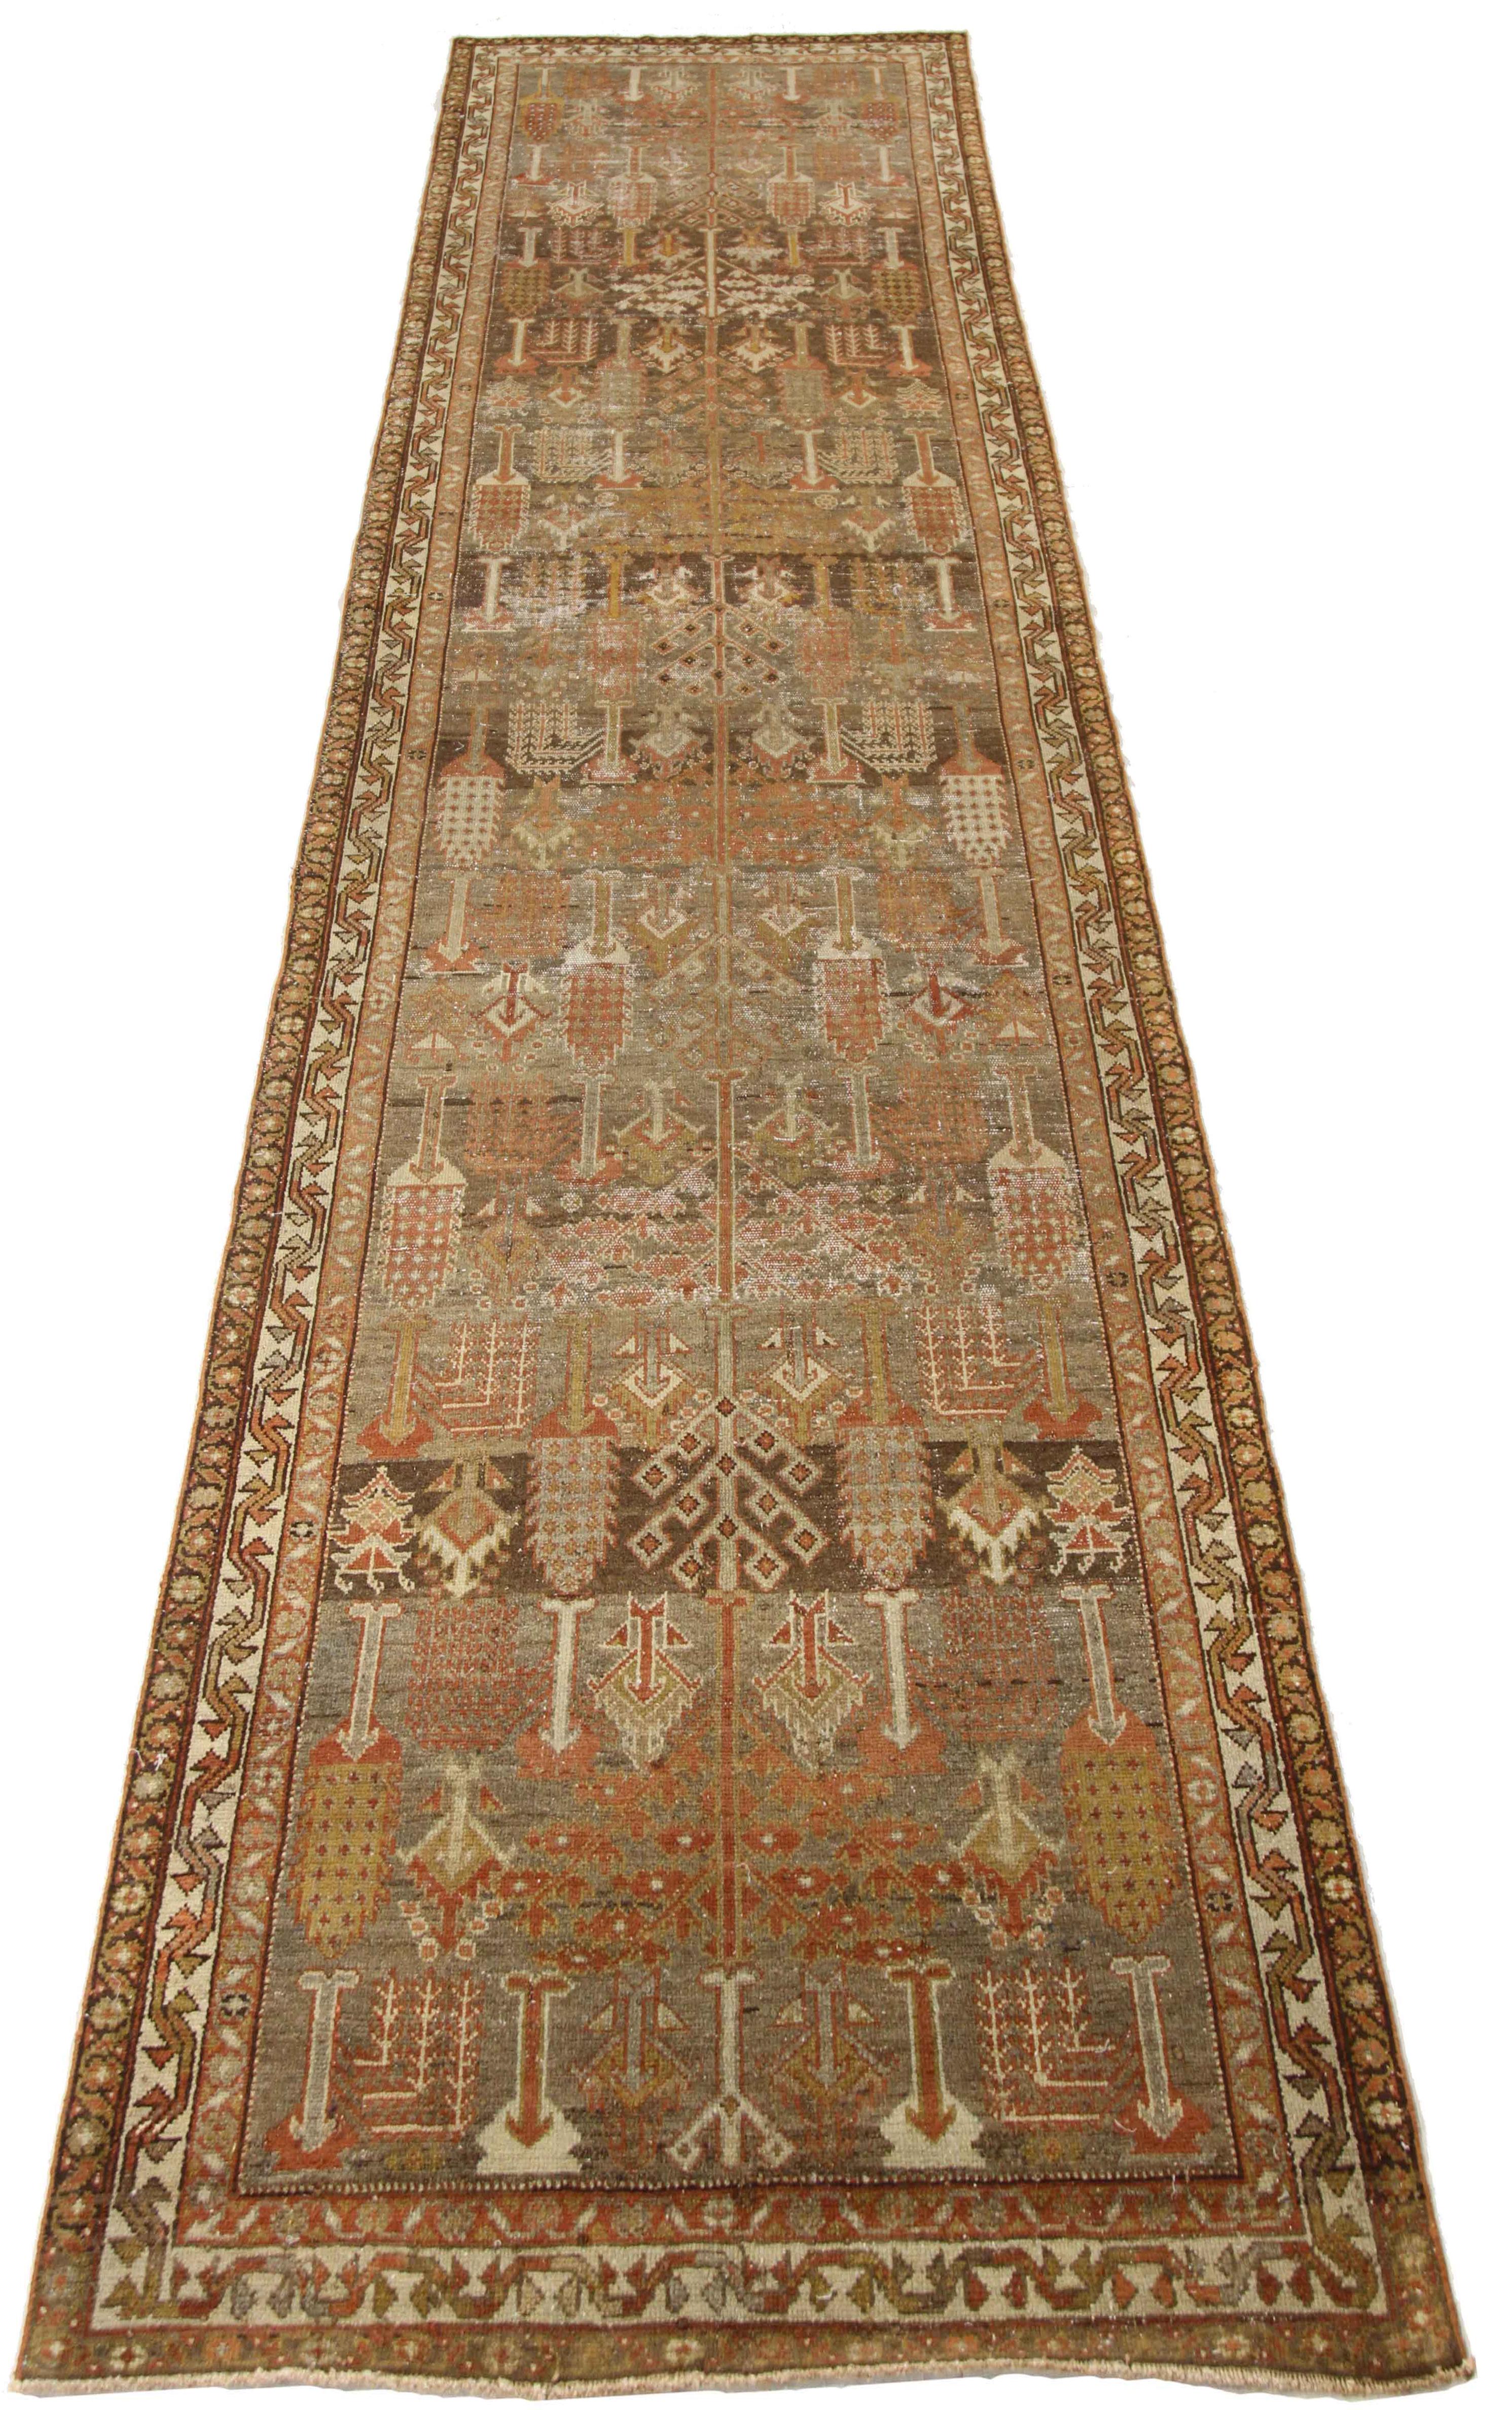 Antique Persian runner rug handwoven from the finest sheep’s wool. It’s colored with all-natural vegetable dyes that are safe for humans and pets. It’s a traditional Bakhtiar design handwoven by expert artisans. It’s a lovely runner rug that can be